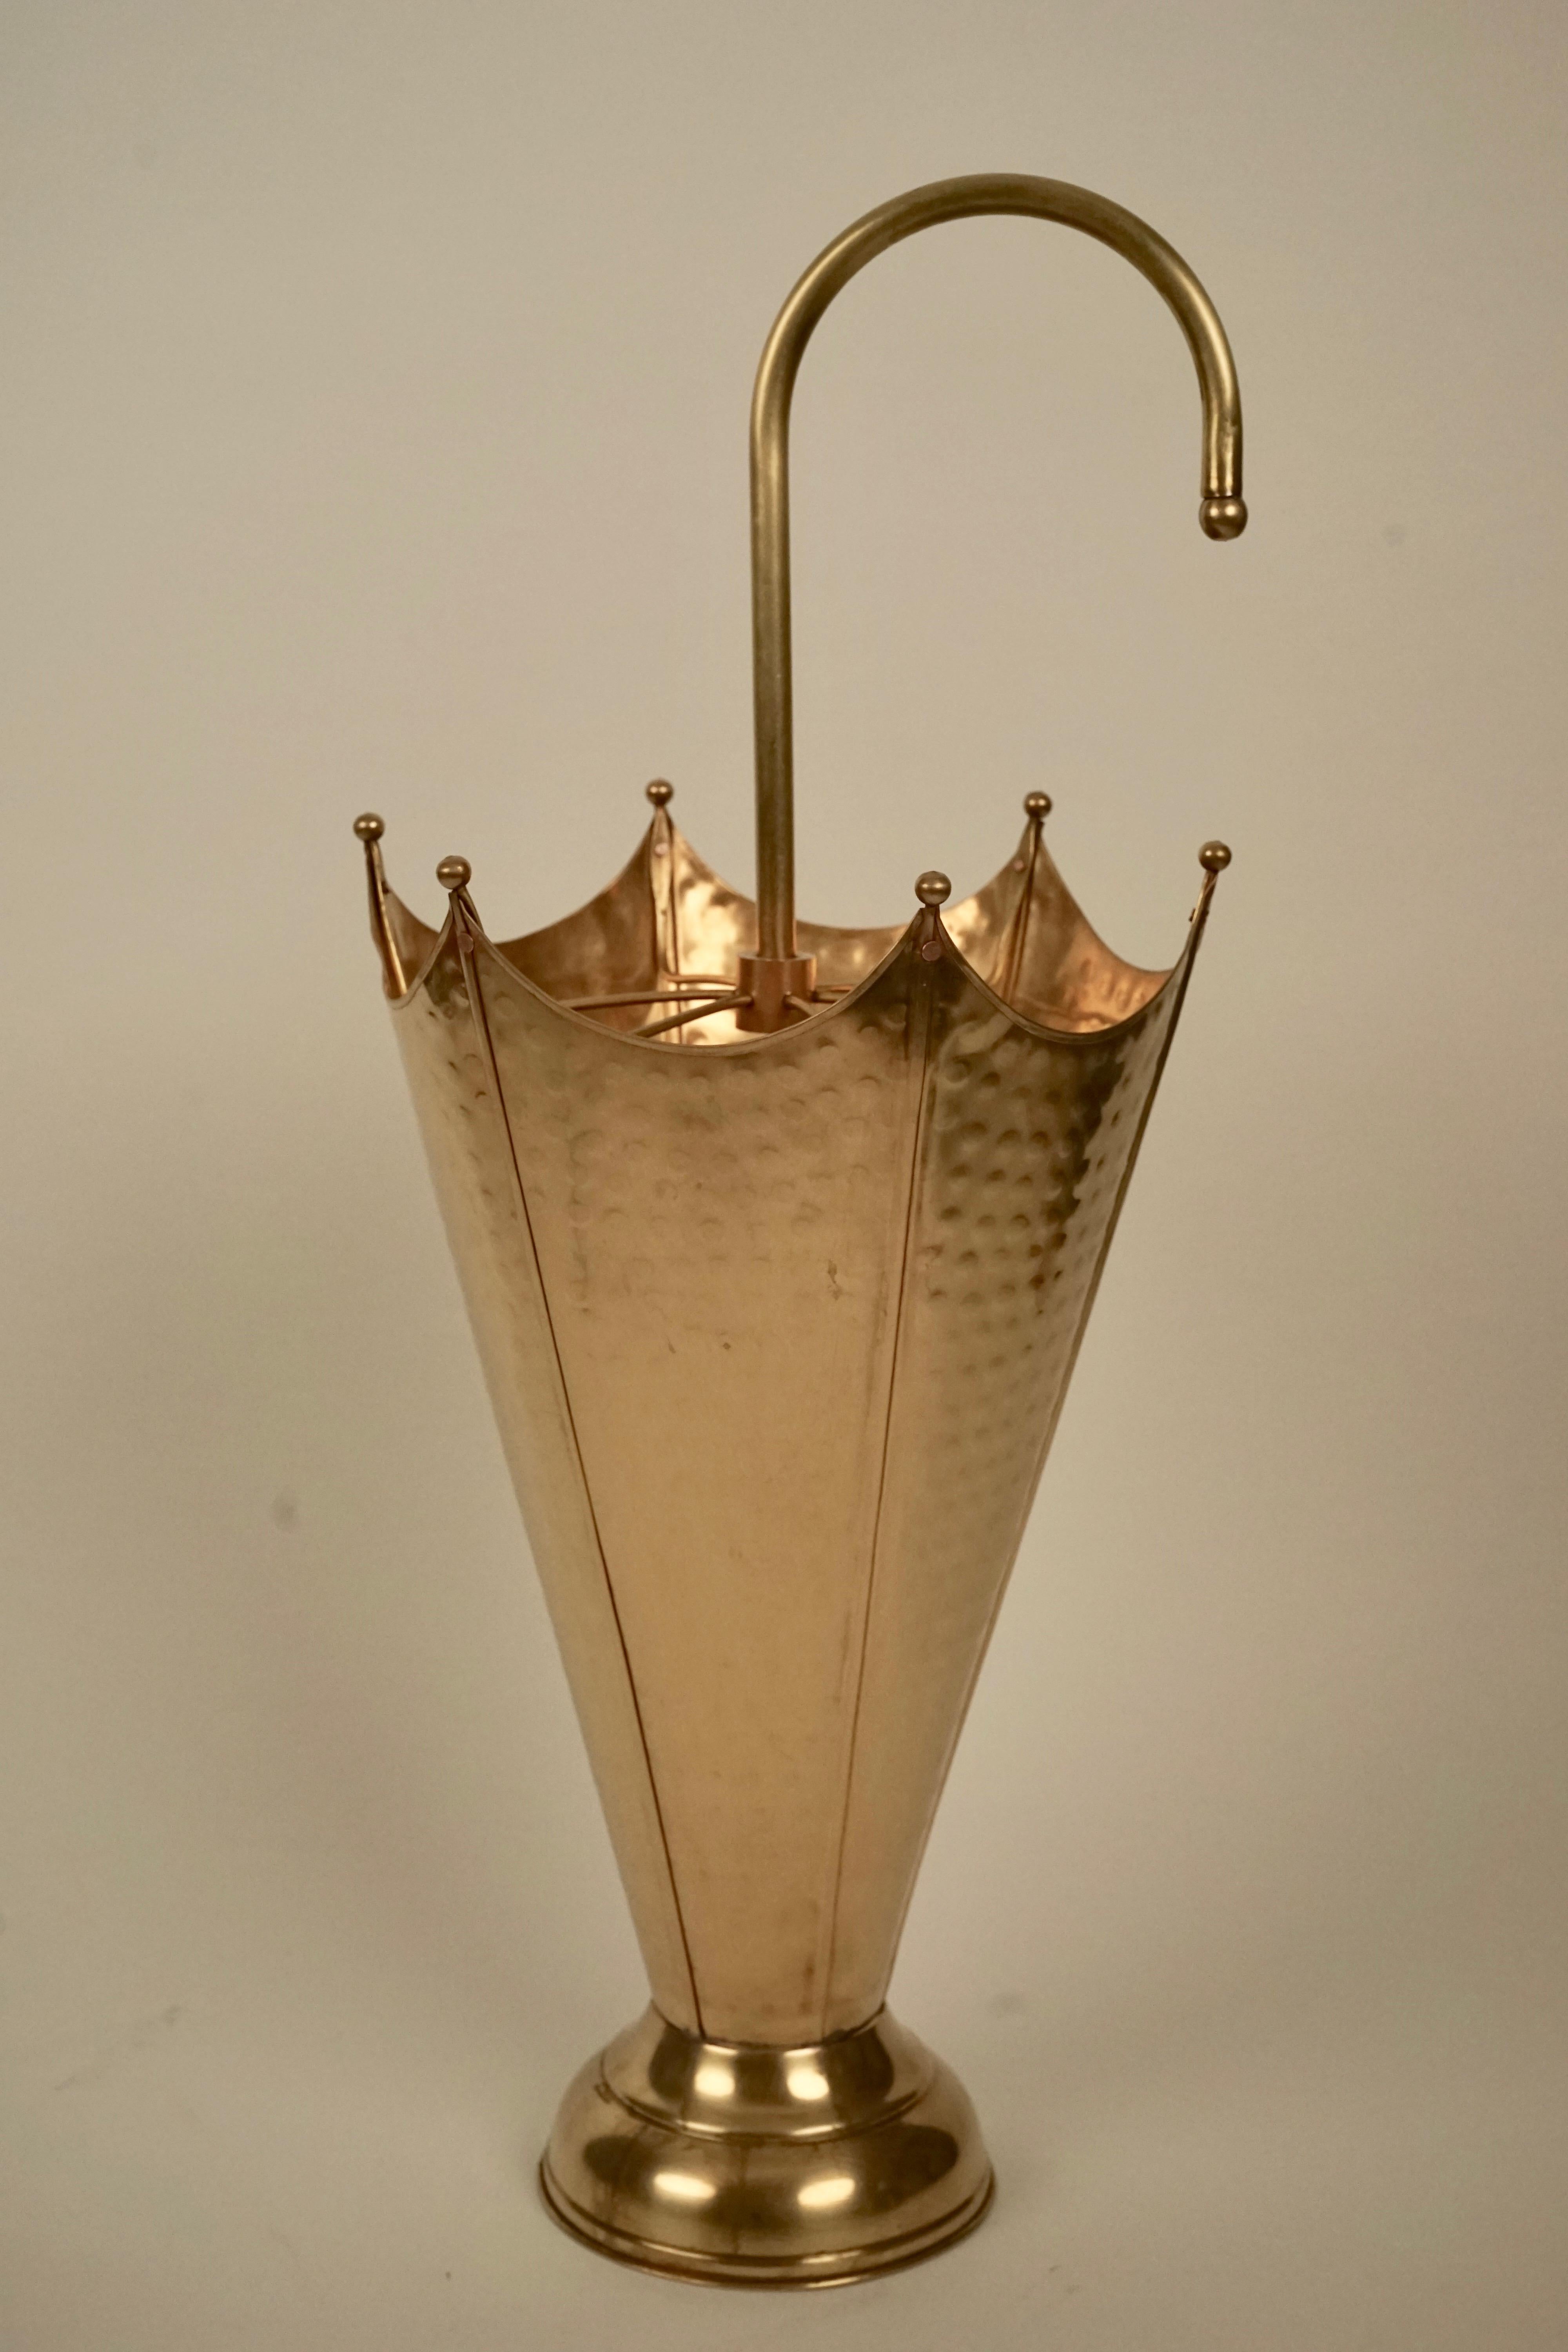 Another umbrella stand from the 1960's . This wonderful decorative object, formed out of hammered brass
into an umbrella form. 

This is a wonderful decorative object for every entrance way.